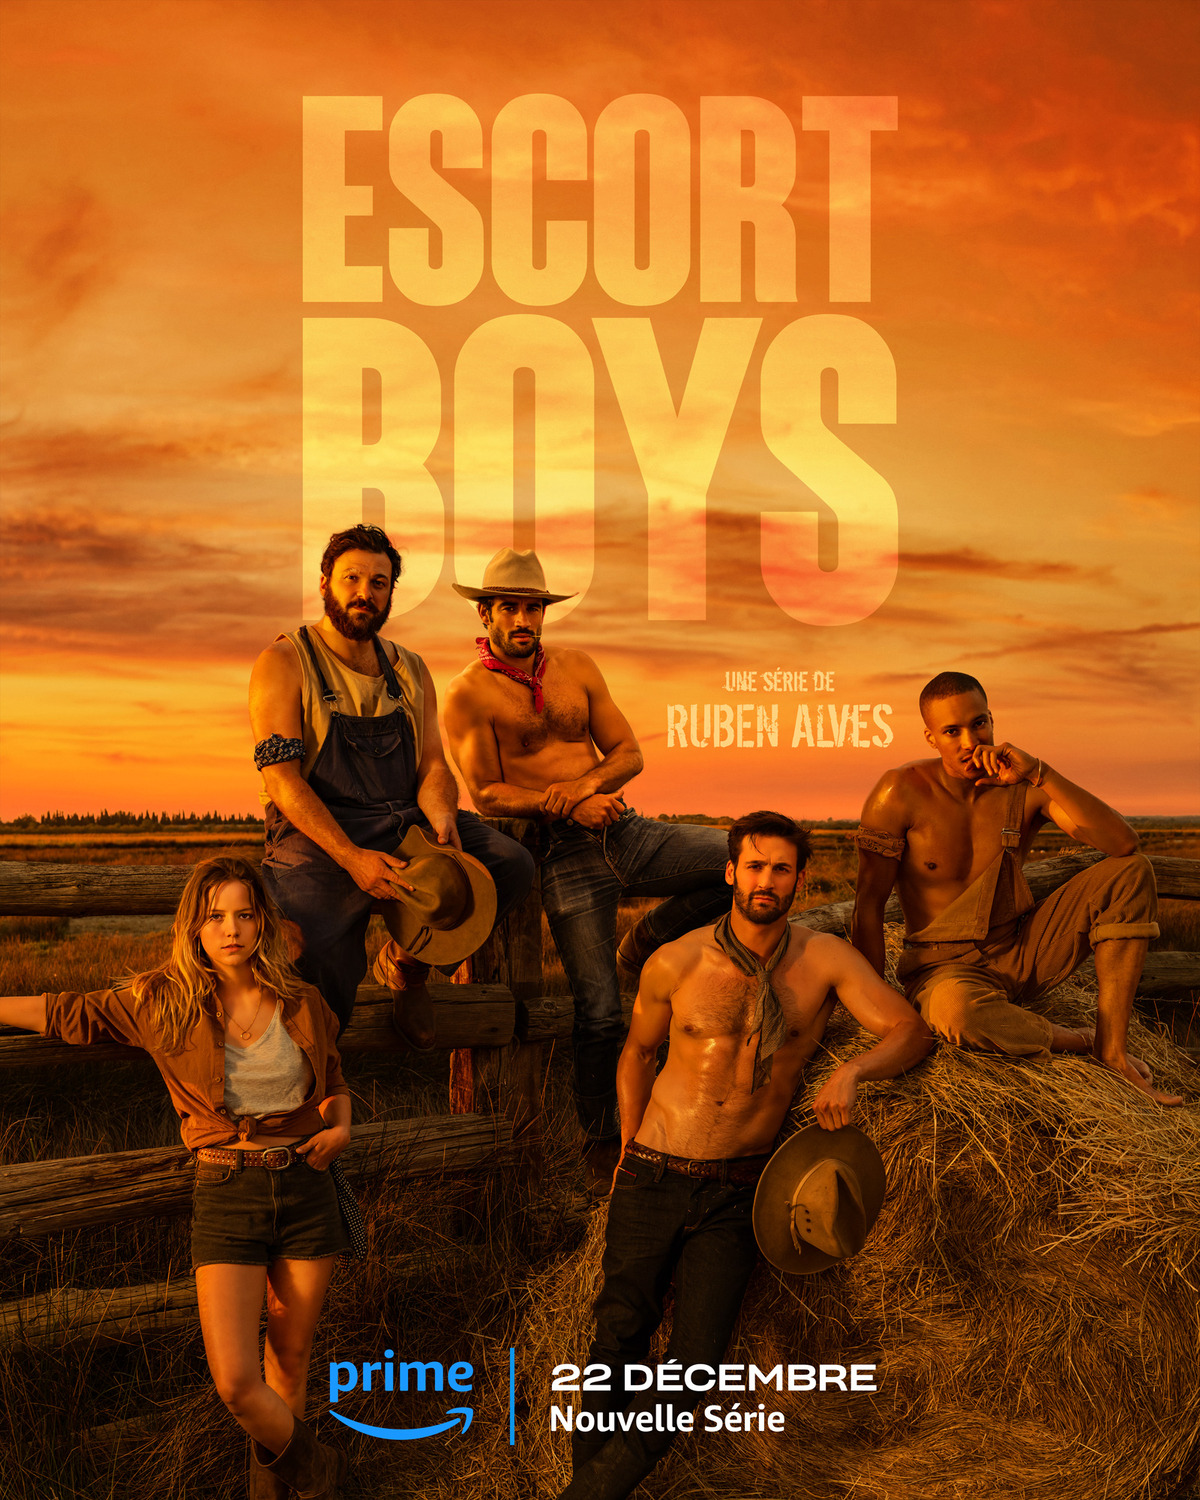 Extra Large TV Poster Image for Escort Boys 